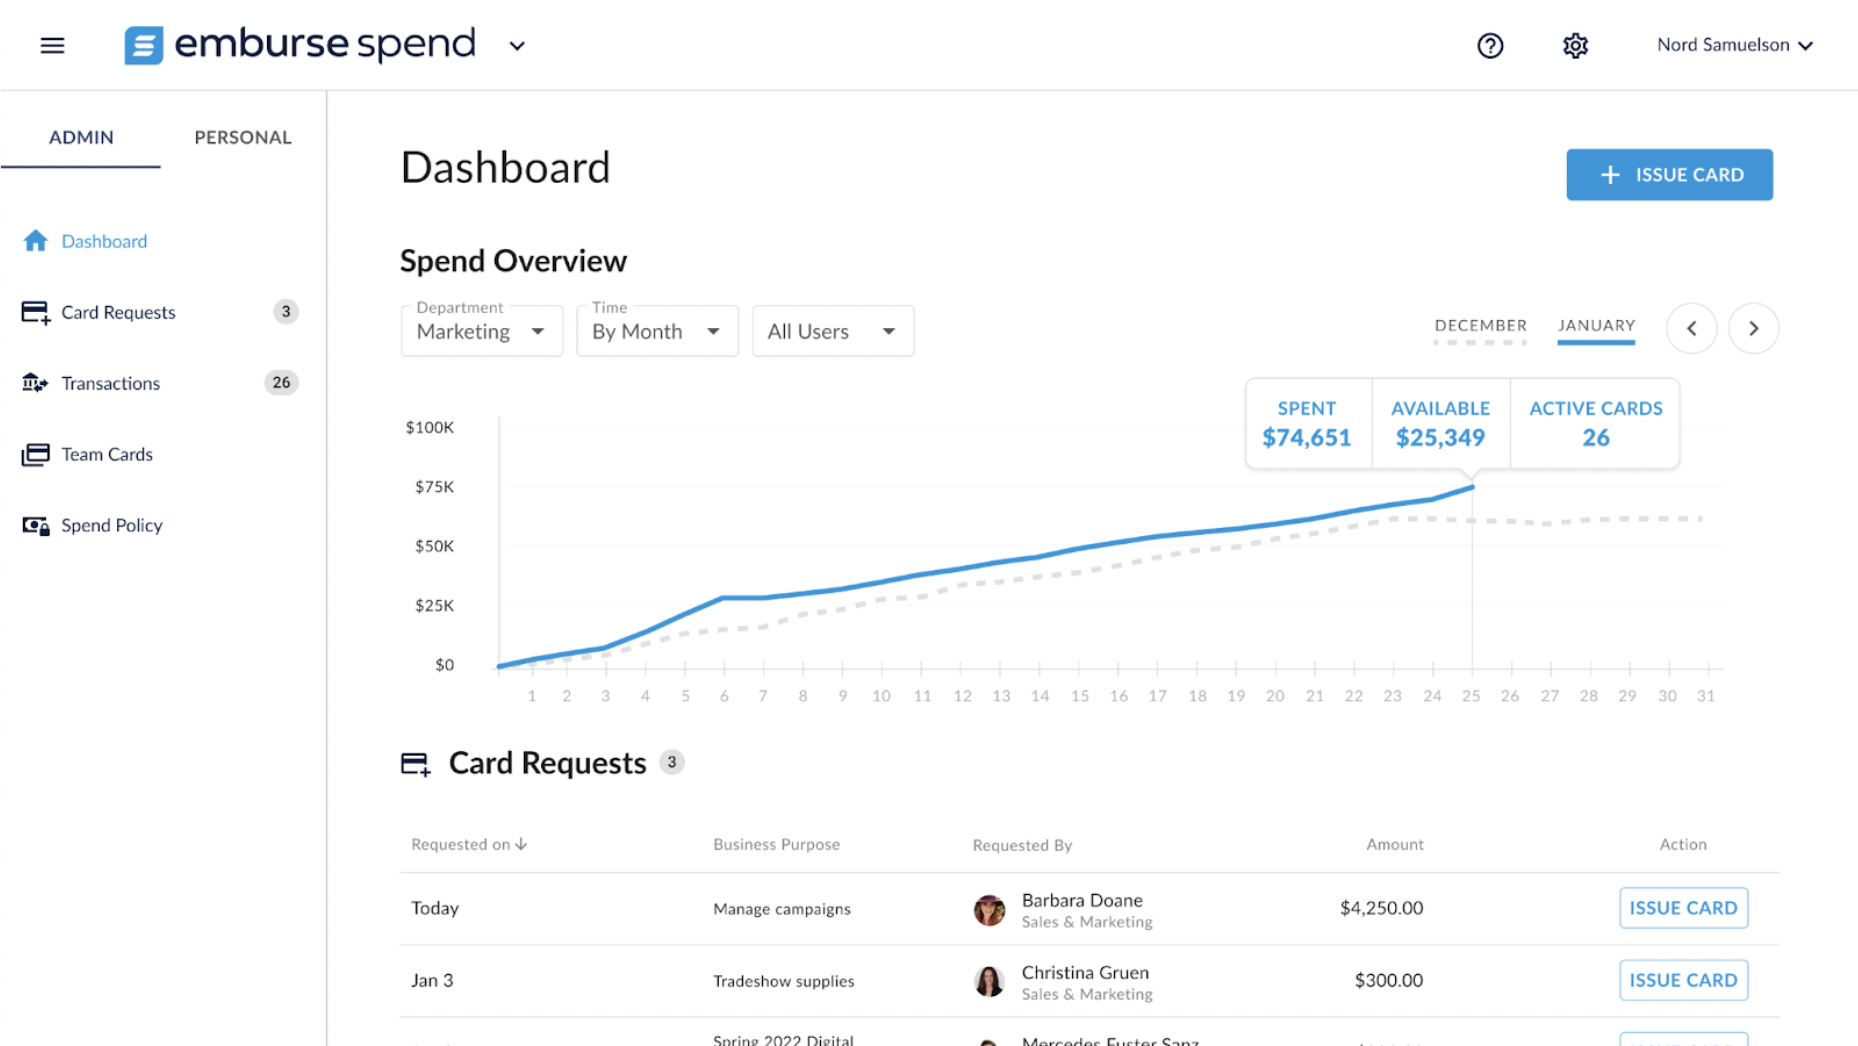 This is the dashboard budget manager use to see an overview of their team's spend trends and pending card requests for additional spend from their team to review and approve.